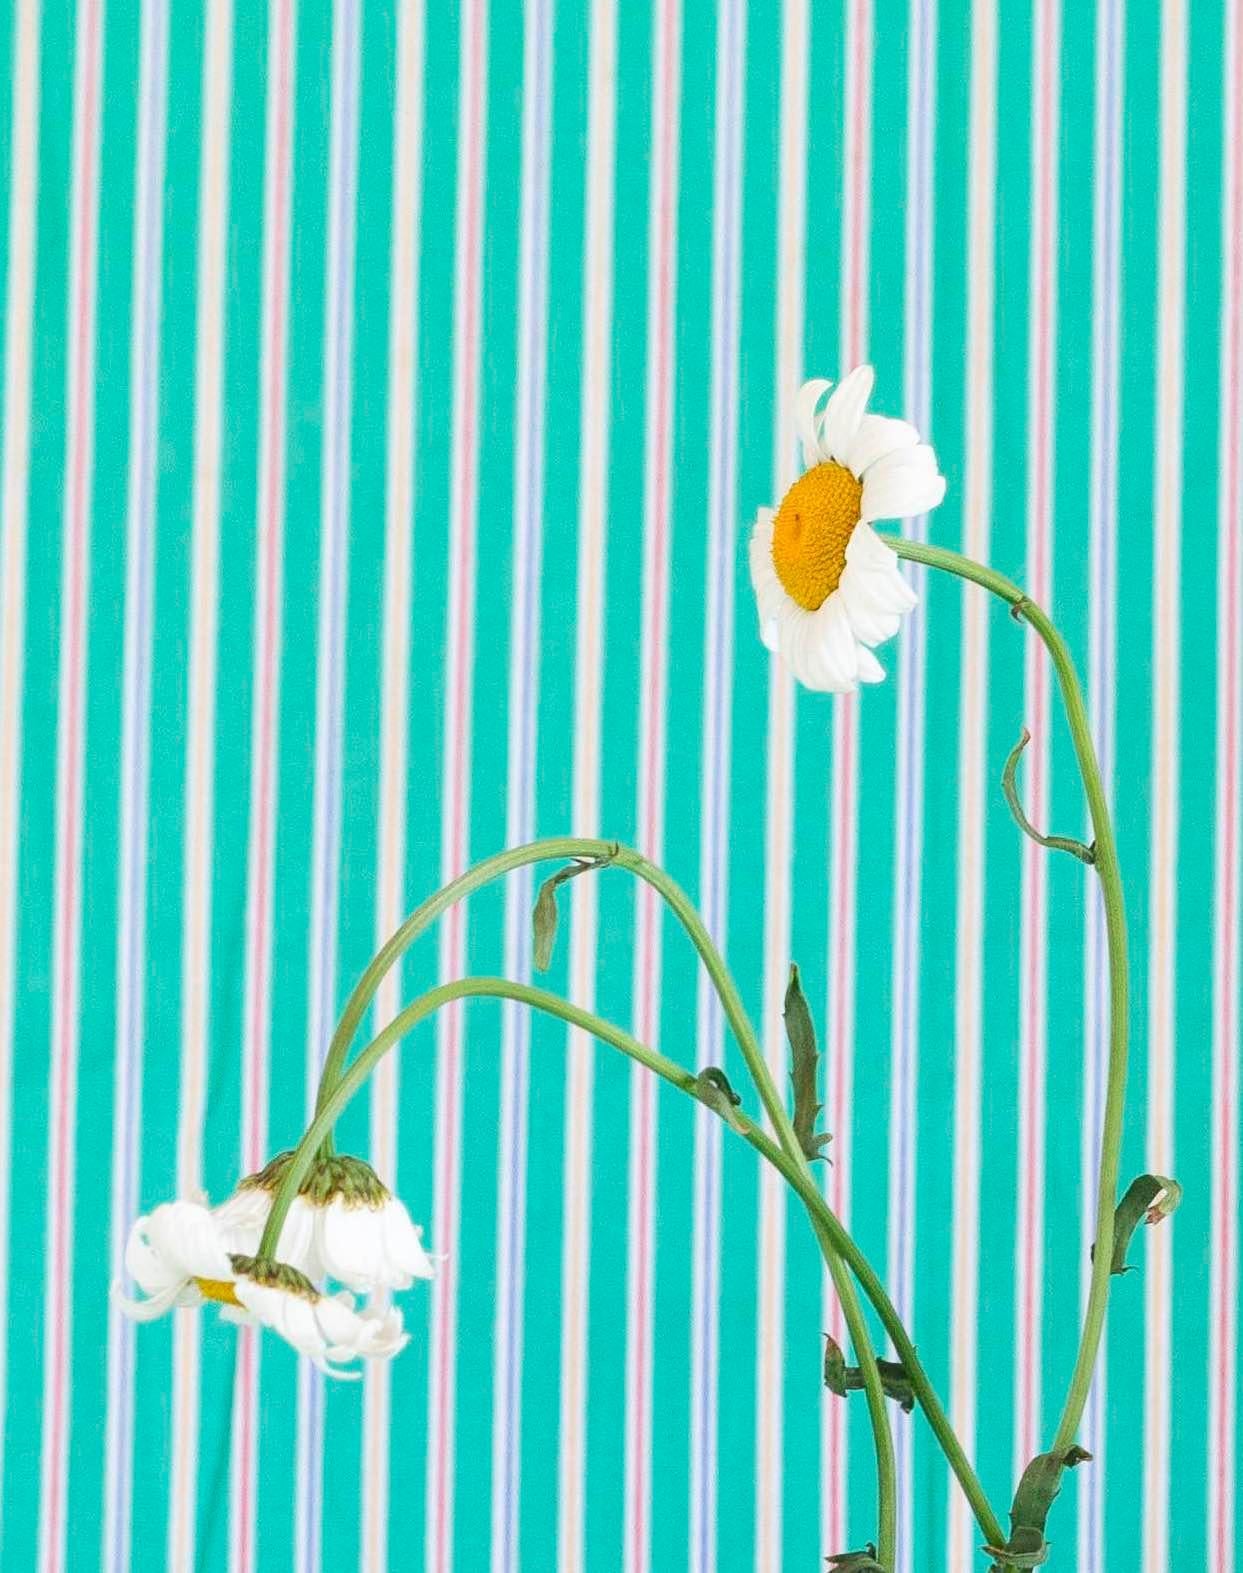 This bold turquoise and yellow striped floral photograph is an original work by Canadian artist Alison Postma. The layered compositions are playful, unexpected, and created through an experimentation process by the artist as she ‘gets to know